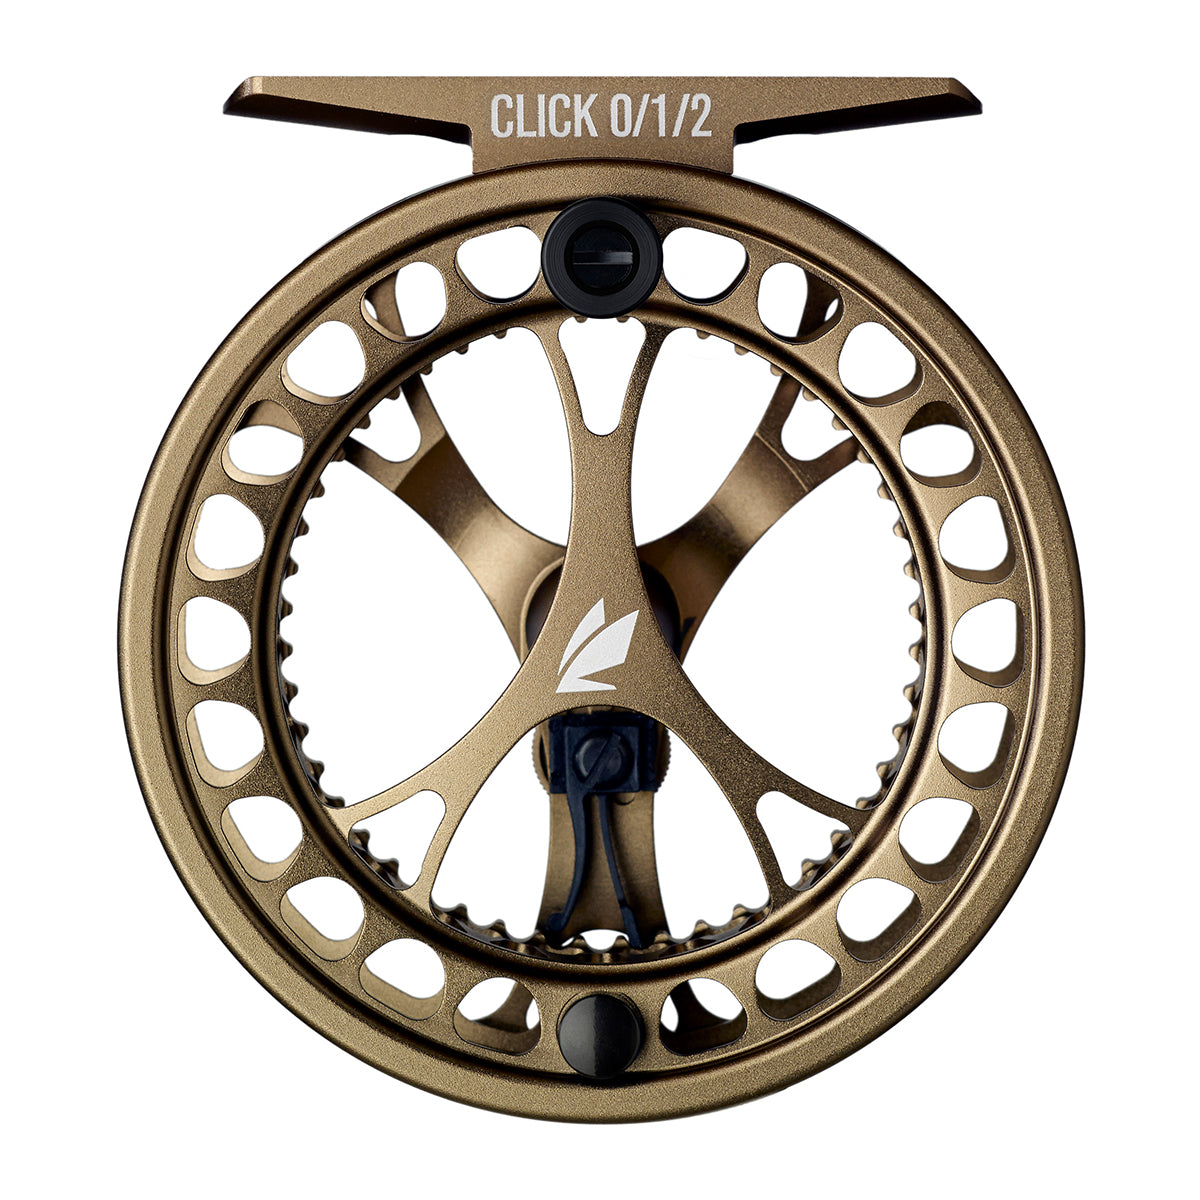 Vosseler TRYST Carbon Reel 3/4 Green – Madison River Fishing Company